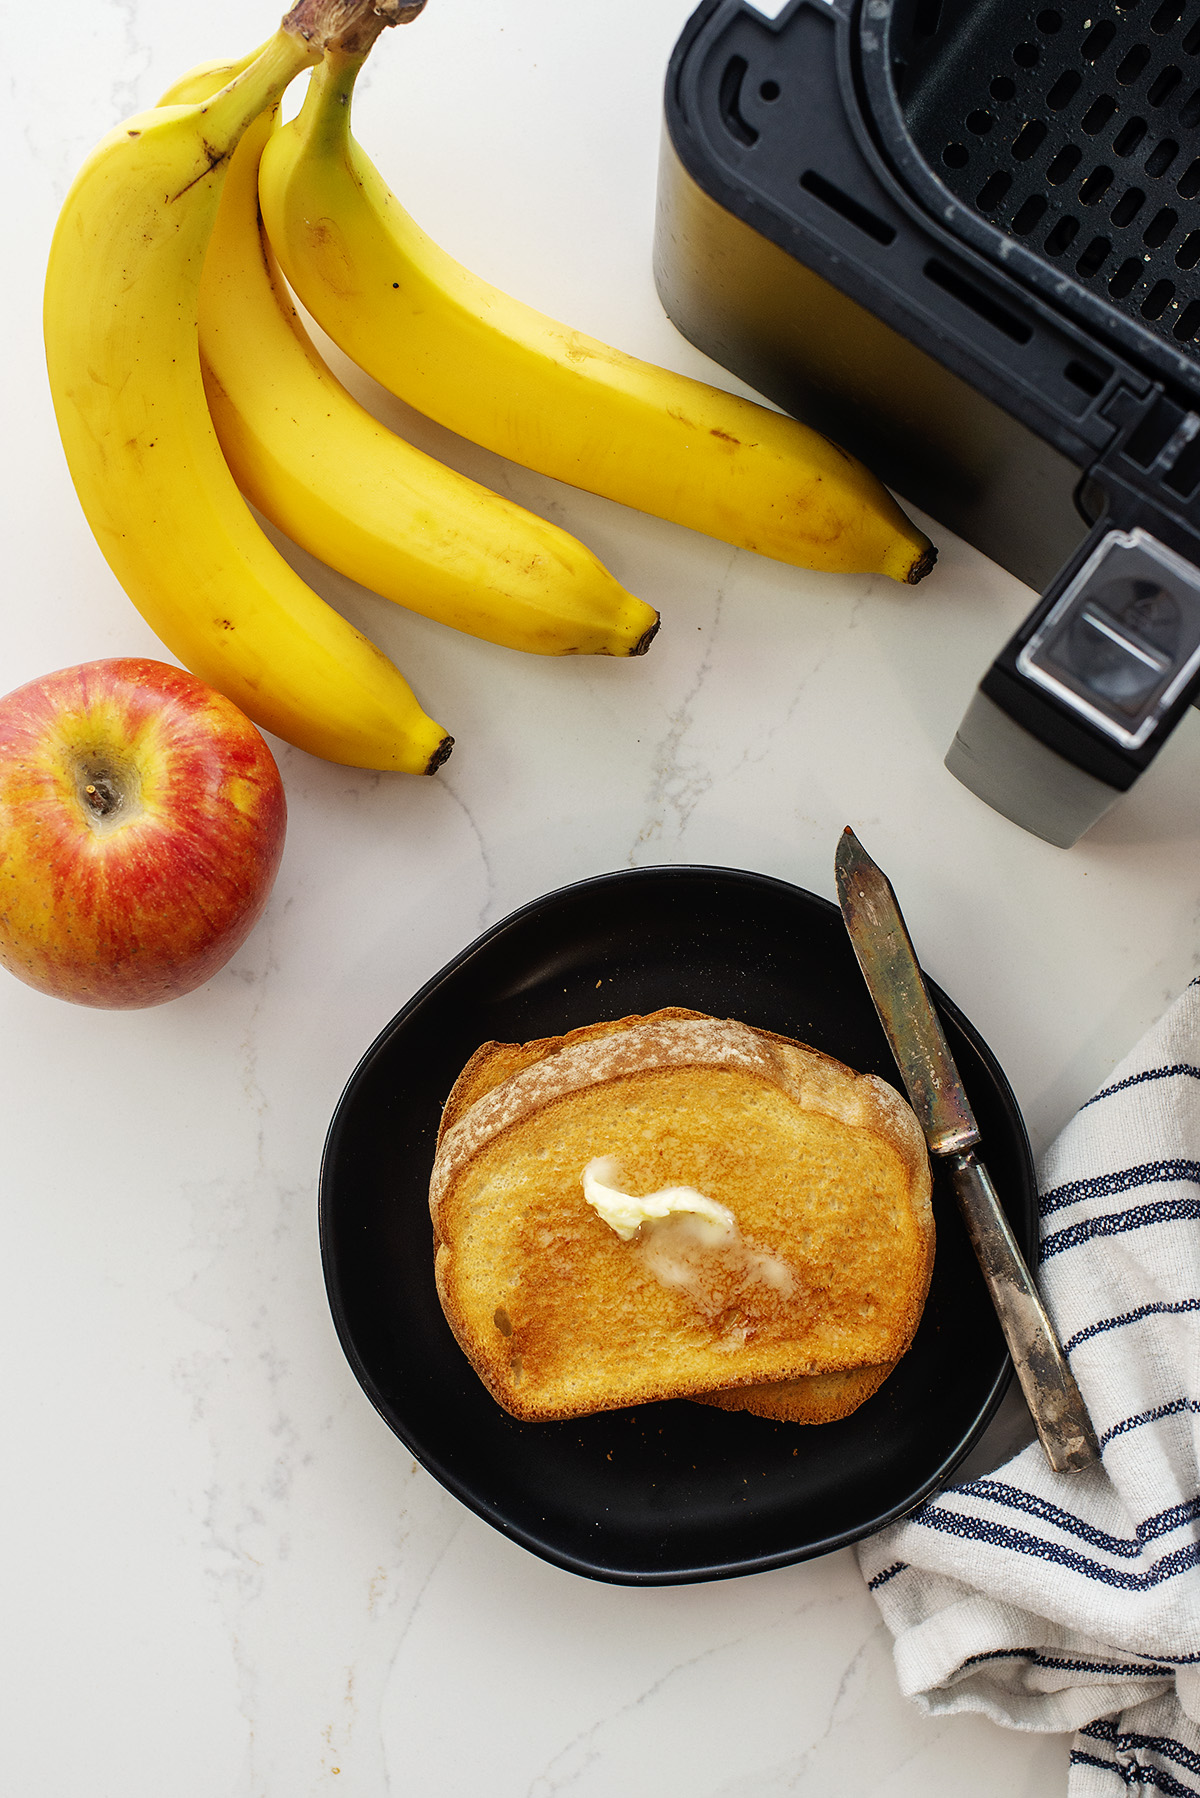 Toast next to bananas and an air fryer basket.